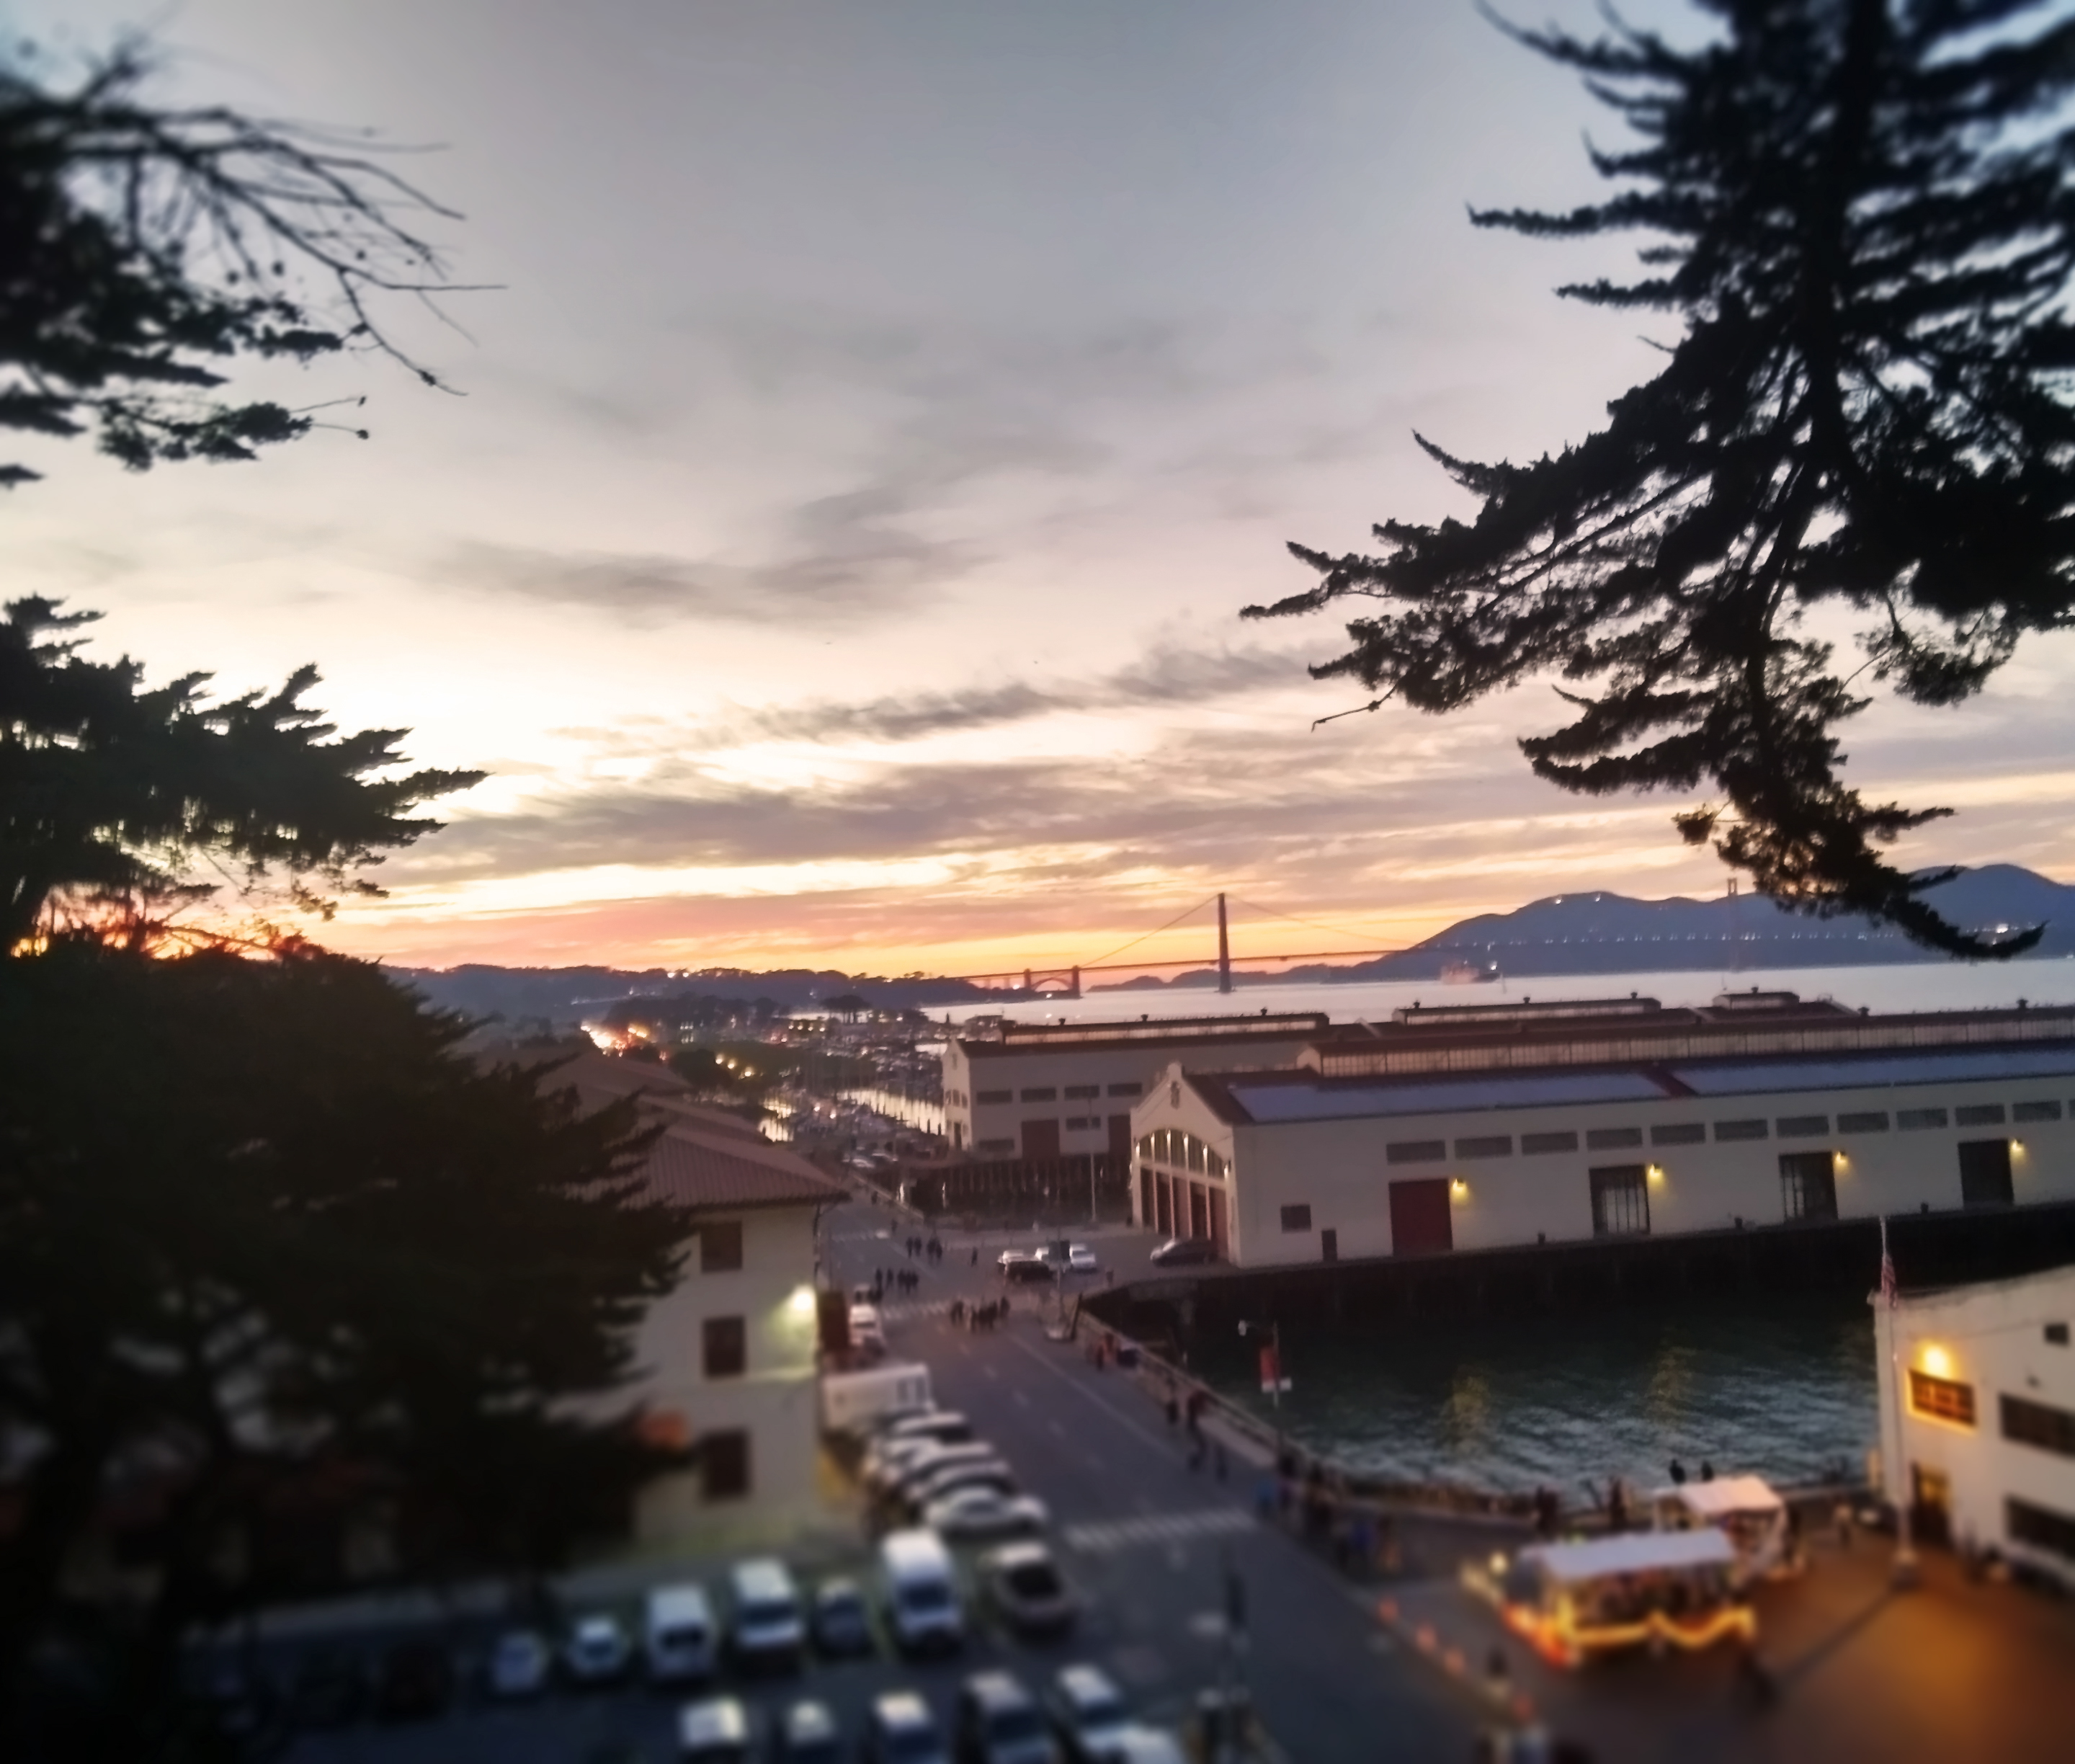 Surrounded by some of San Francisco’s most iconic landmarks Fort Mason inspires City College students with its amazing scenery. Photo by Elena Stuart/The Guardsman 